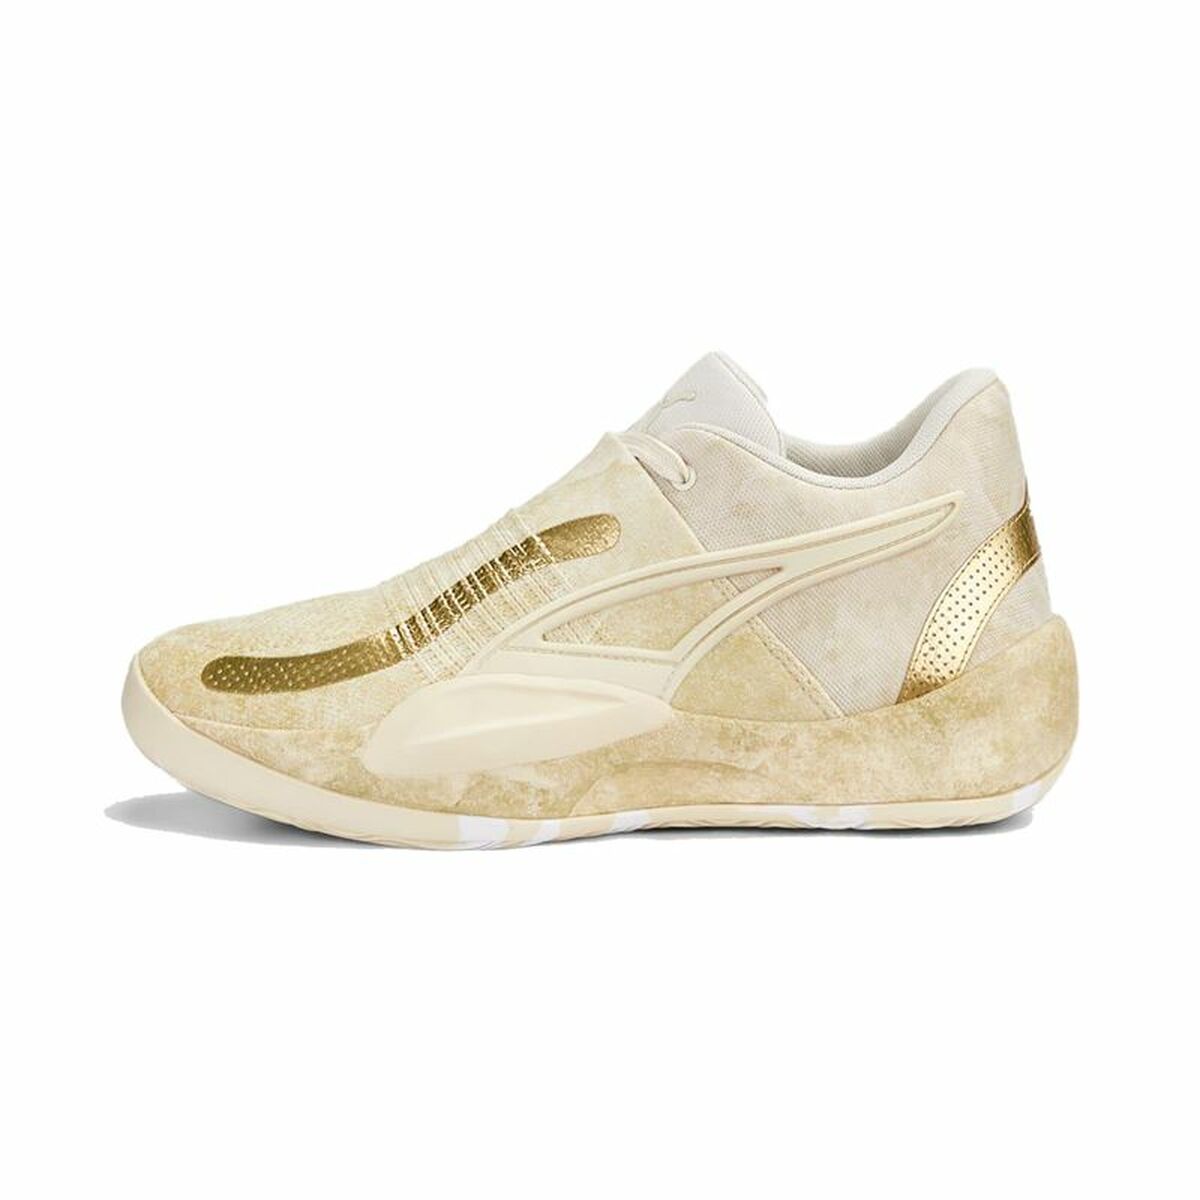 Basketball Shoes for Adults Puma Rise NITRO Golden Beige